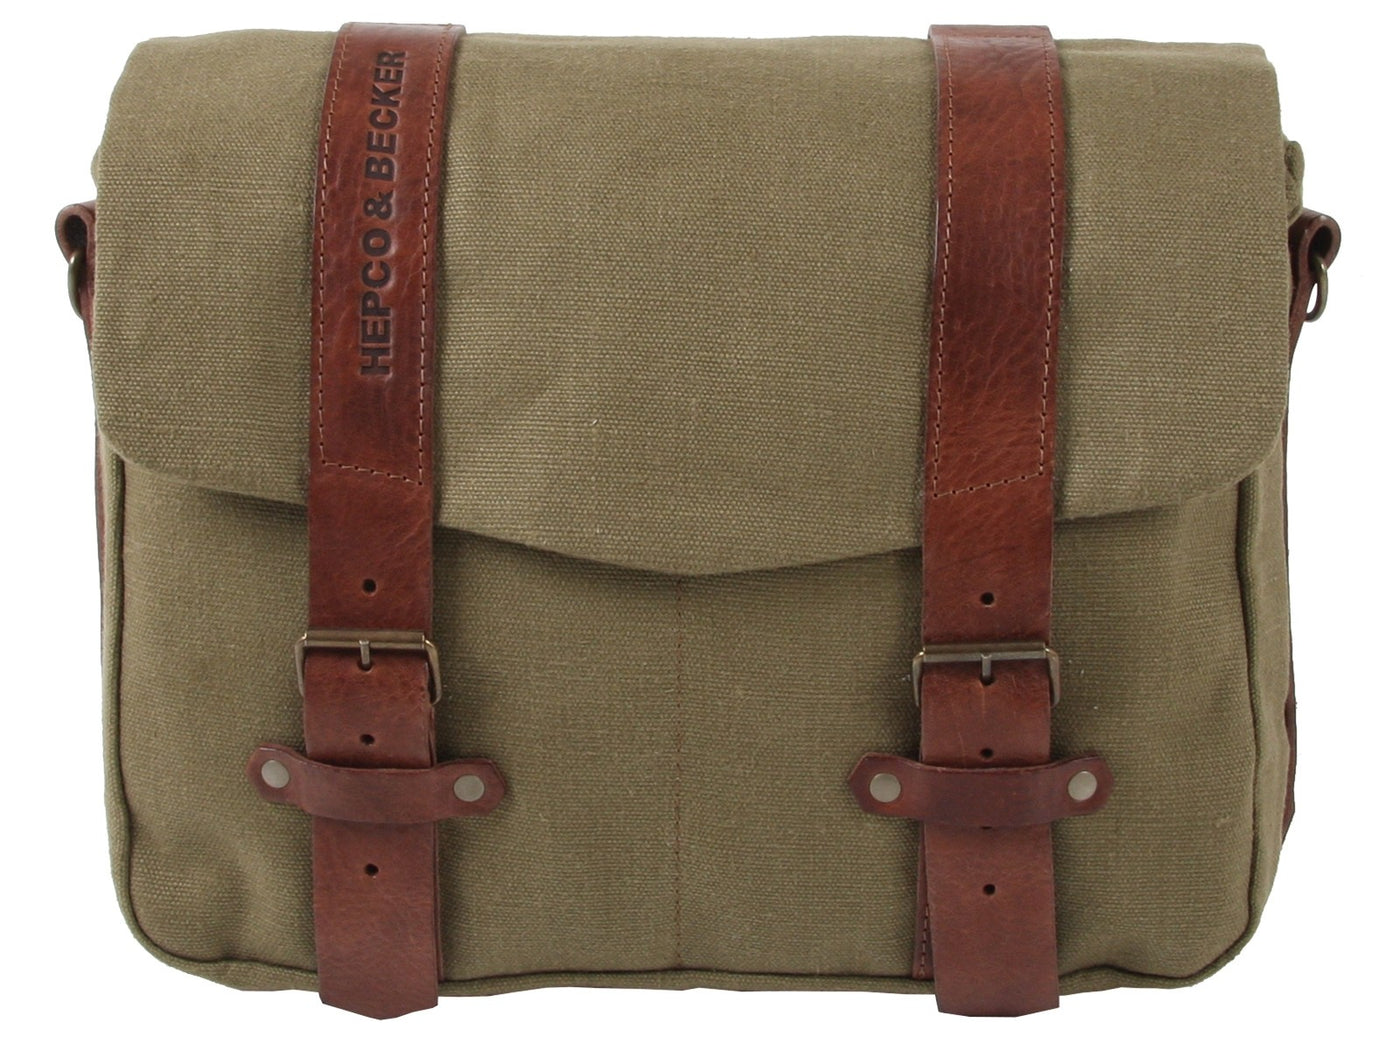 LEGACY Courier Bag in KHAKI for C-Bow Carrier